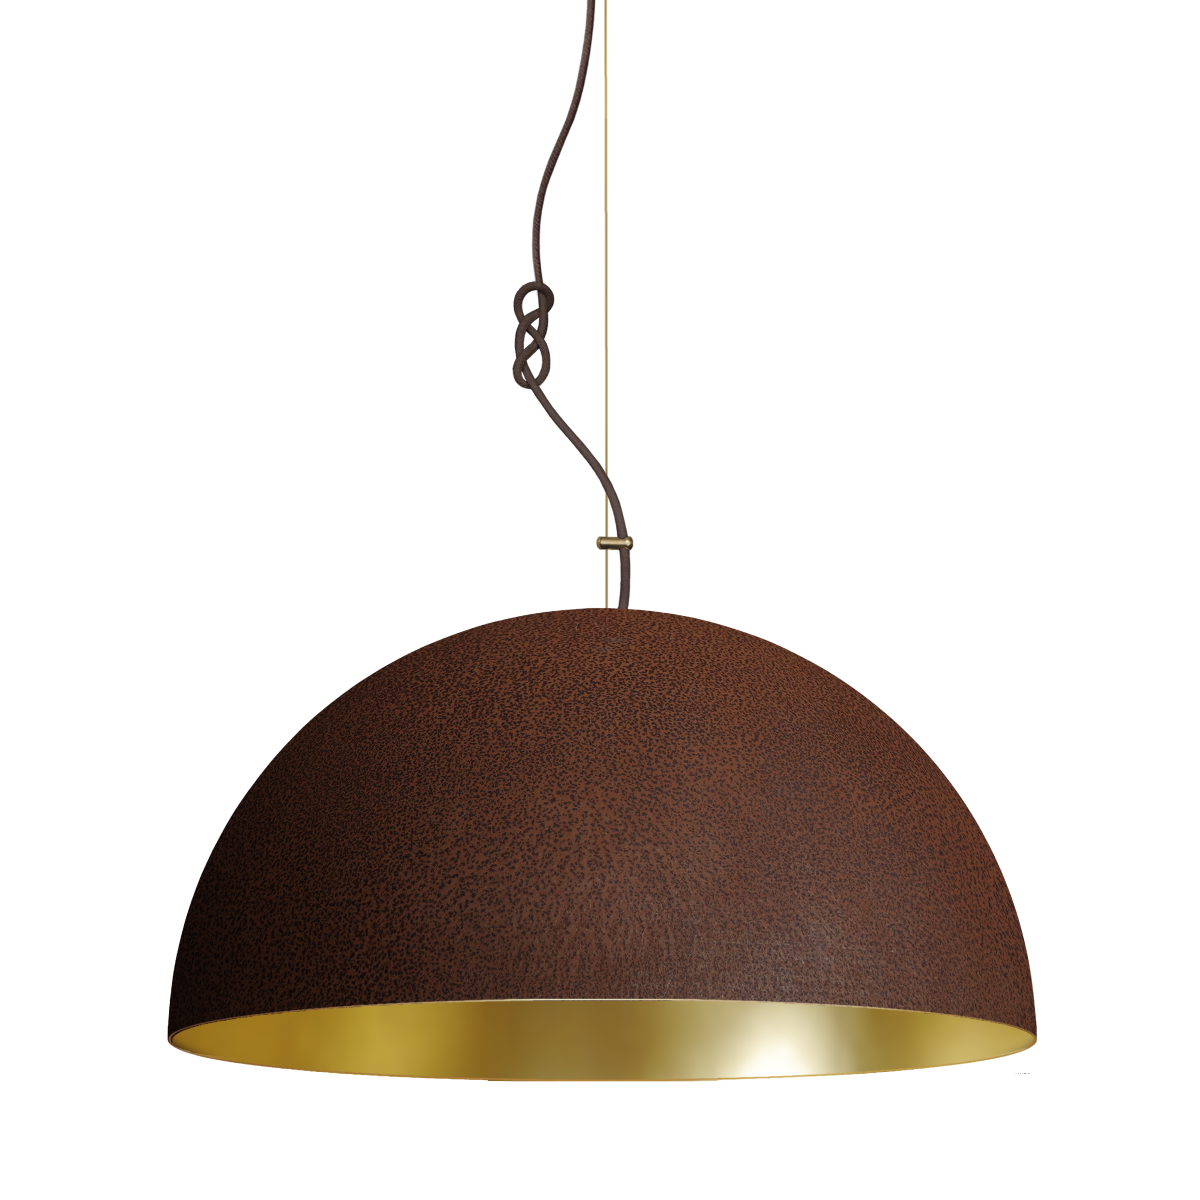 THE QUEEN LARGE - Pendant Light